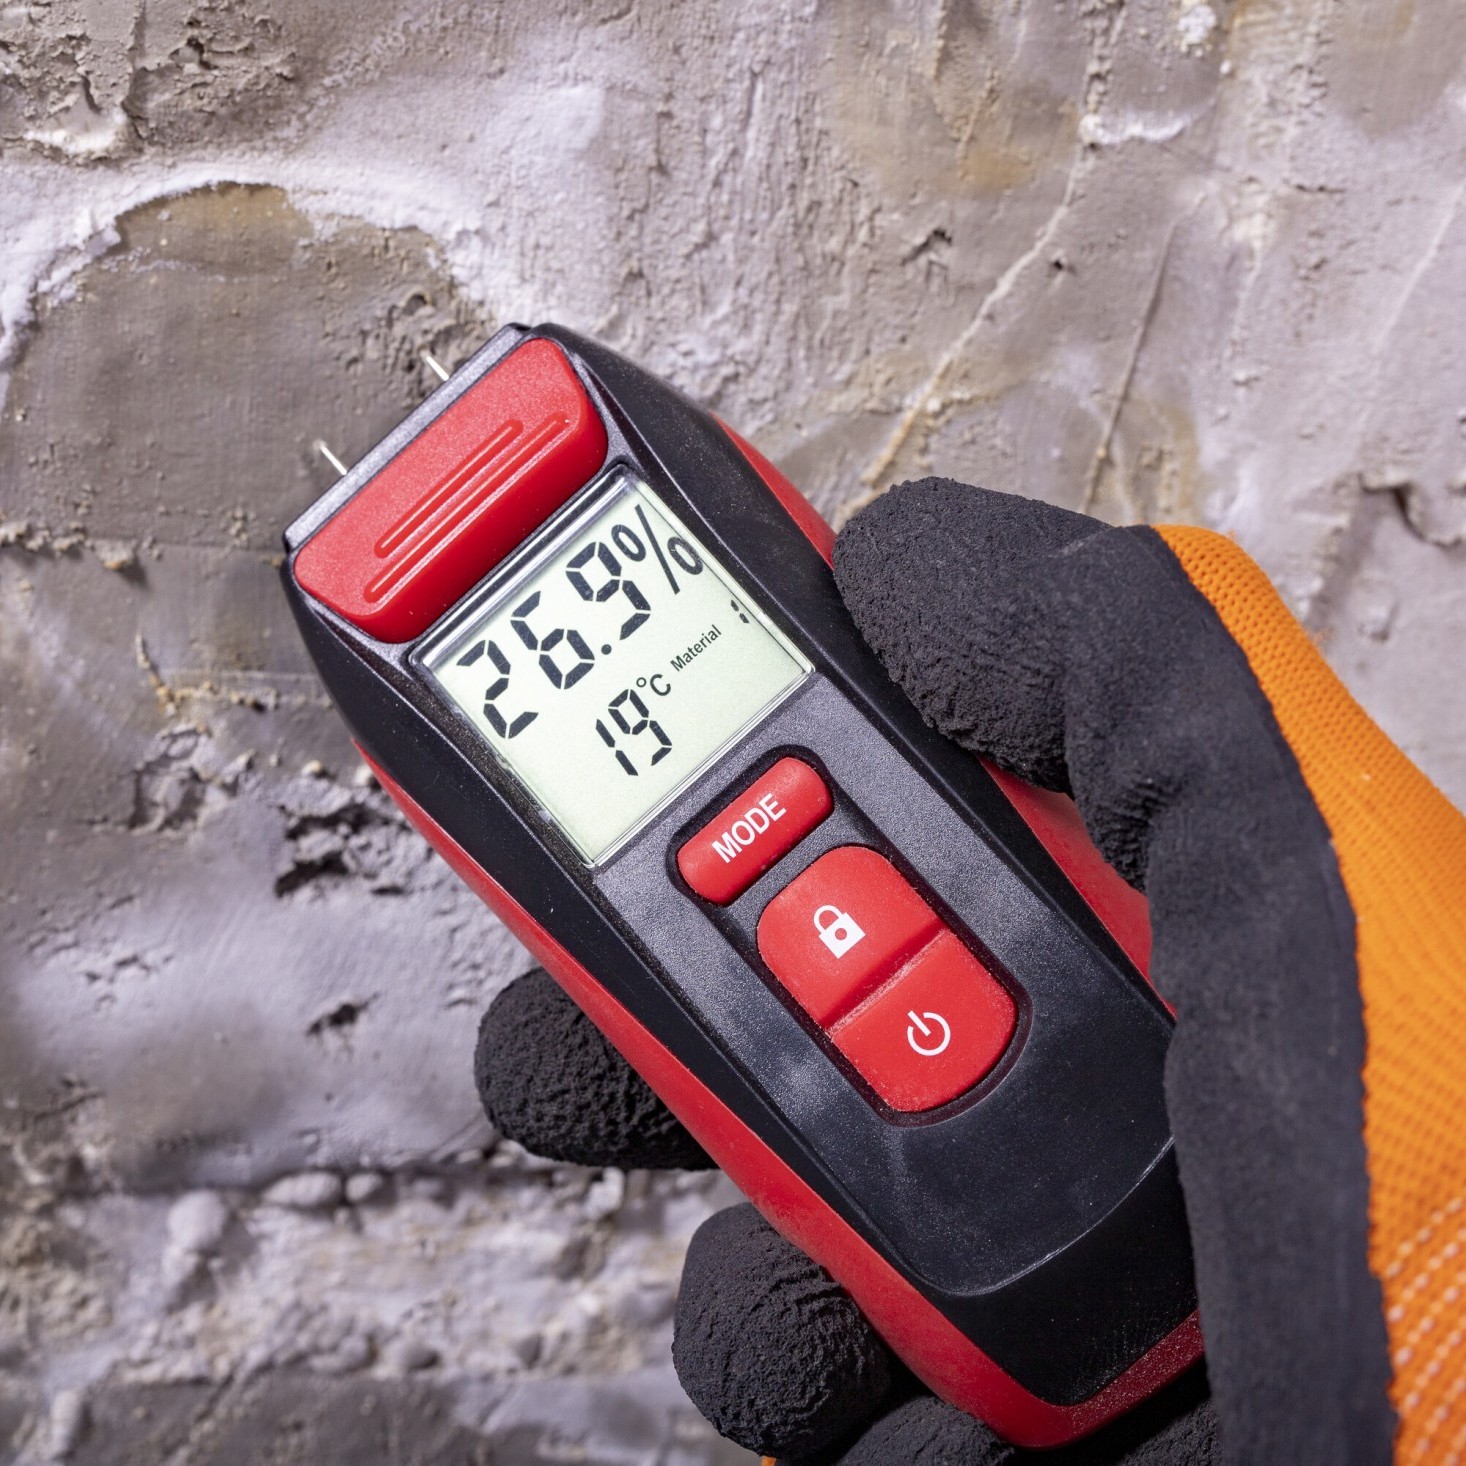 Frequently Asked Questions about Basement Waterproofing in Mississauga